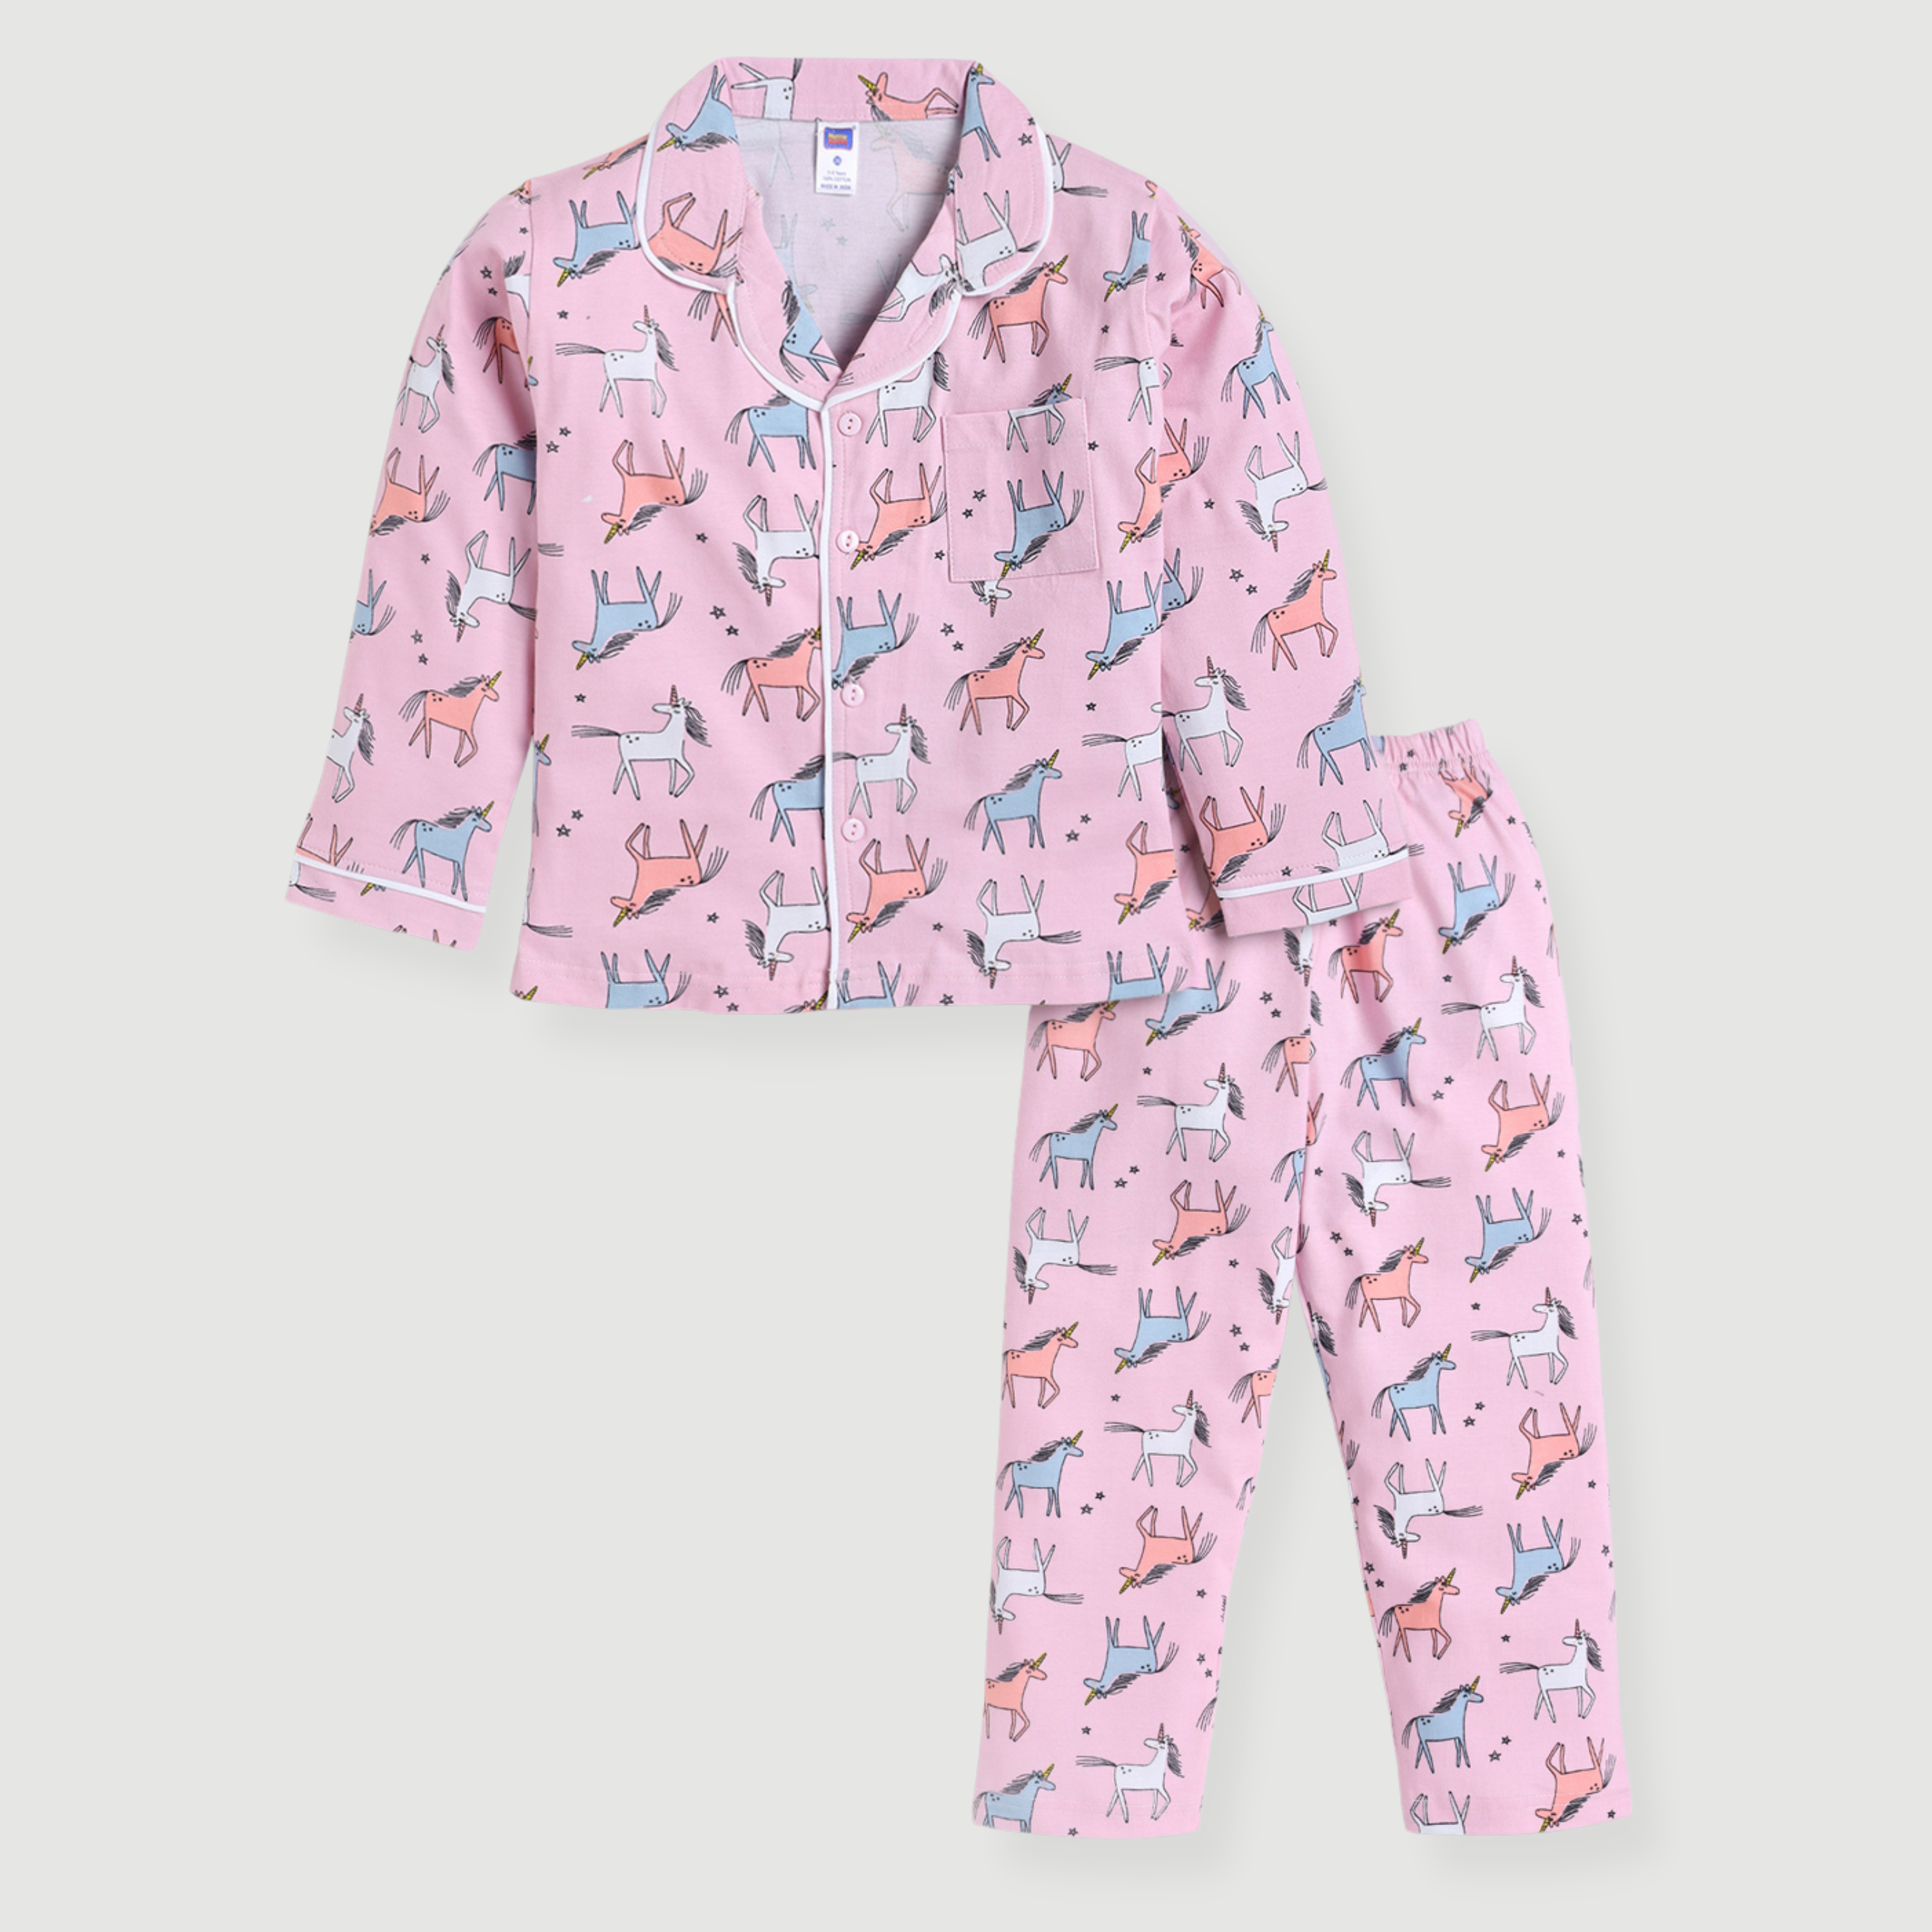 Full Sleeve Night Suit For Girls  - Pink